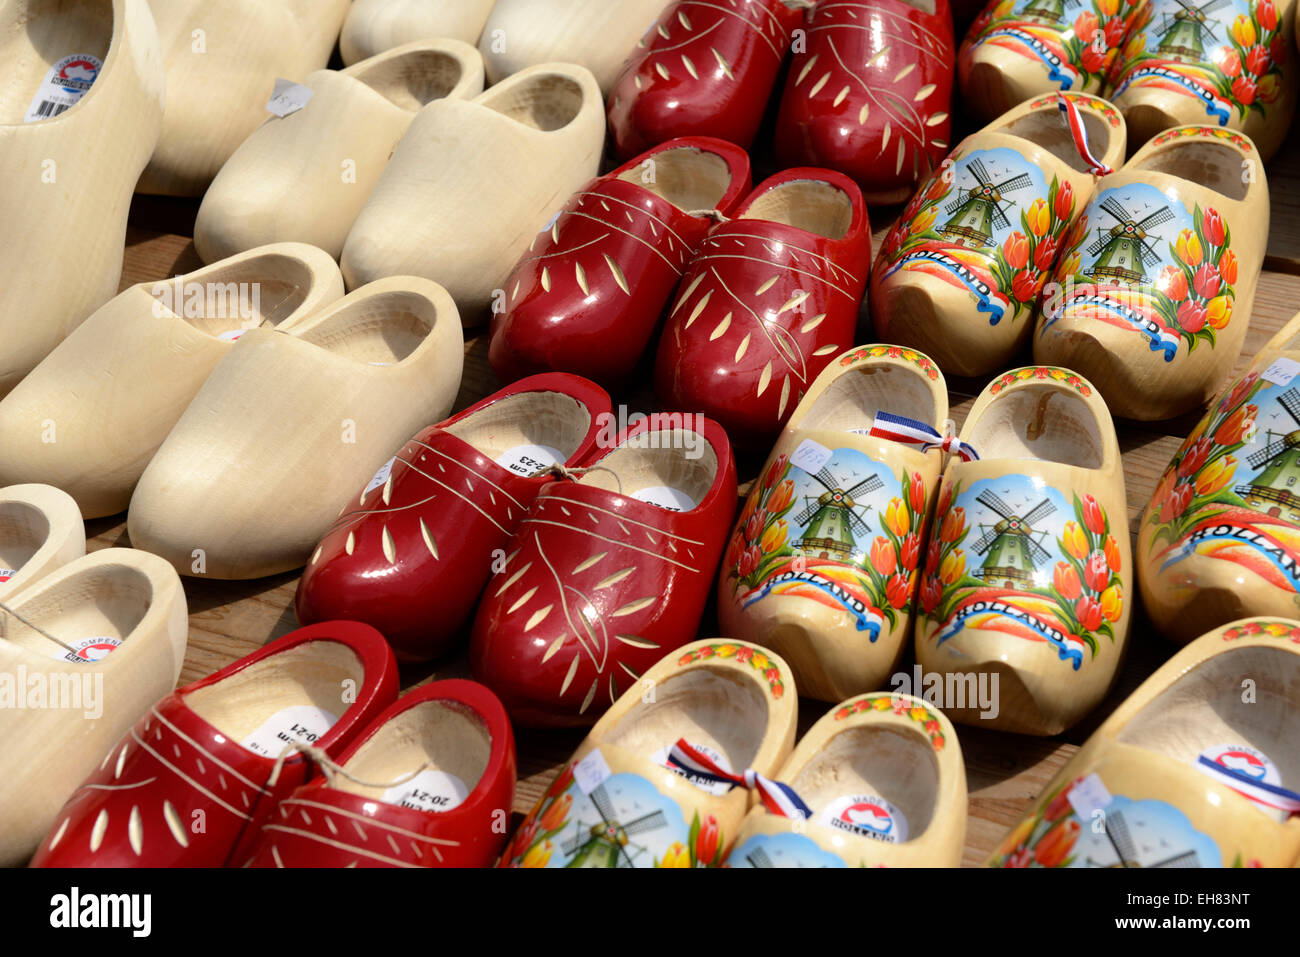 Painted traditional Dutch wooden clogs, Waagplein Square, Alkmaar, North Holland, Netherlands, Europe Stock Photo